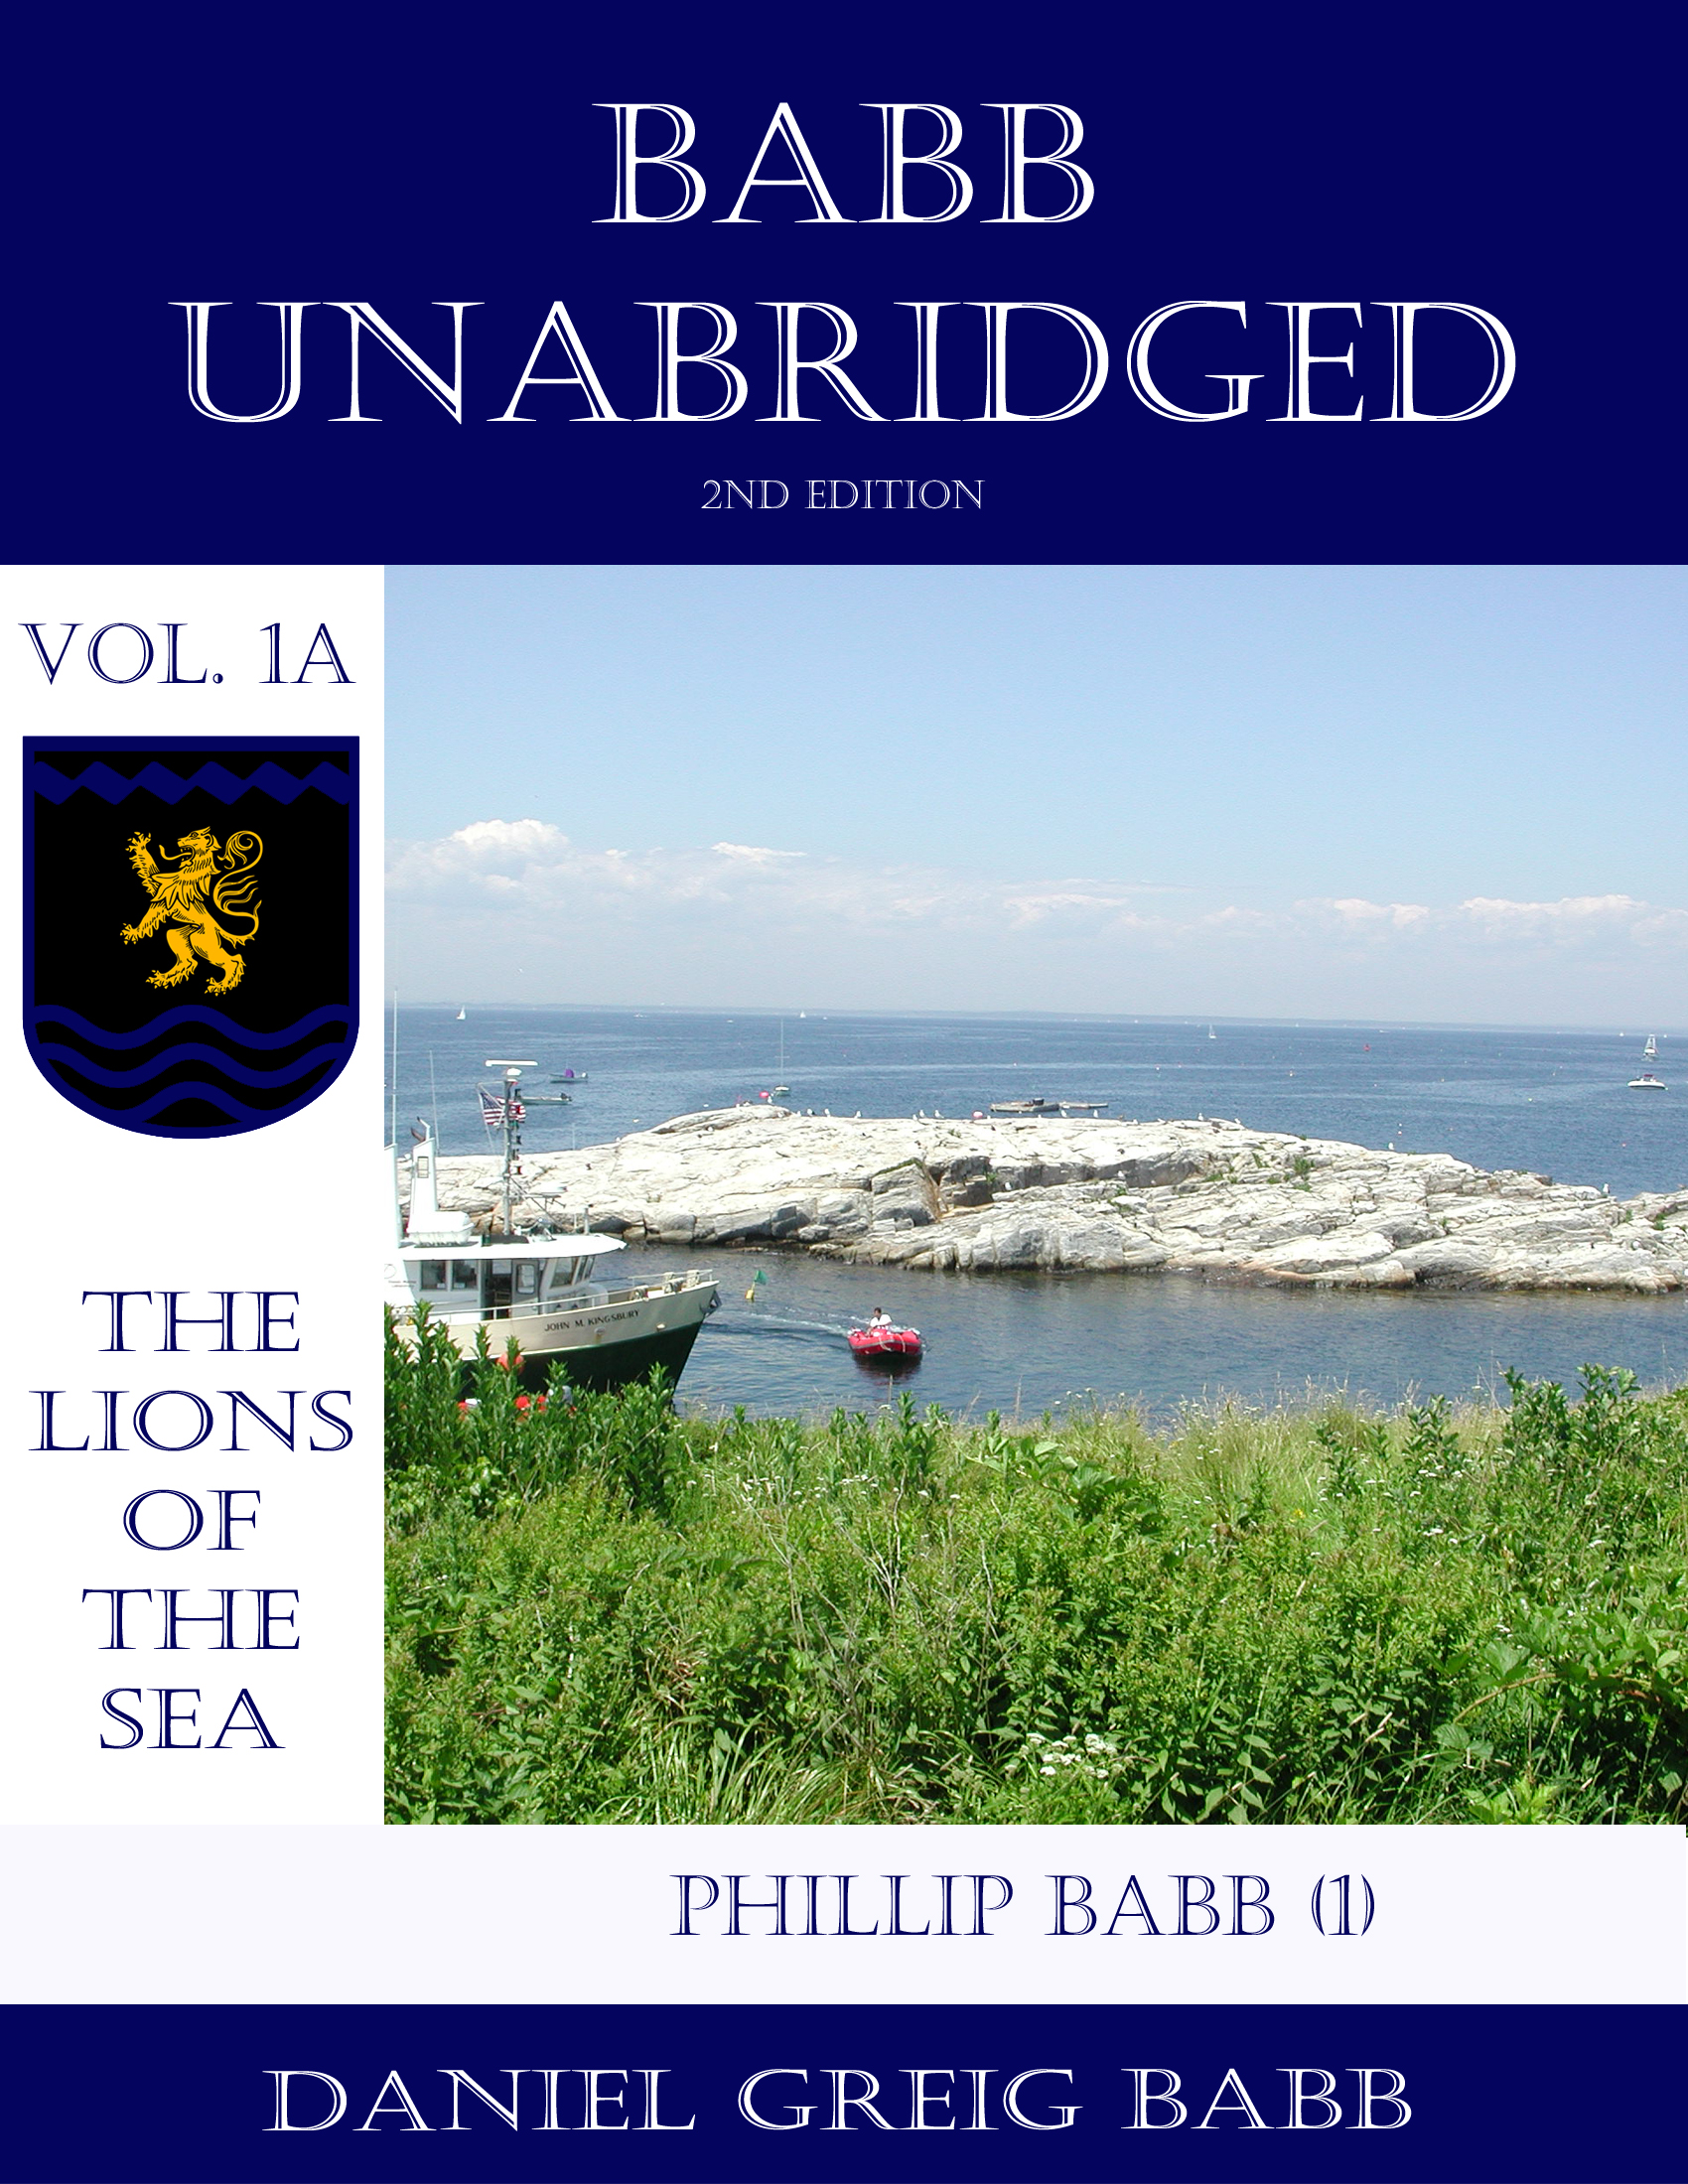 Babb Unabridged, 2nd Edition has just released